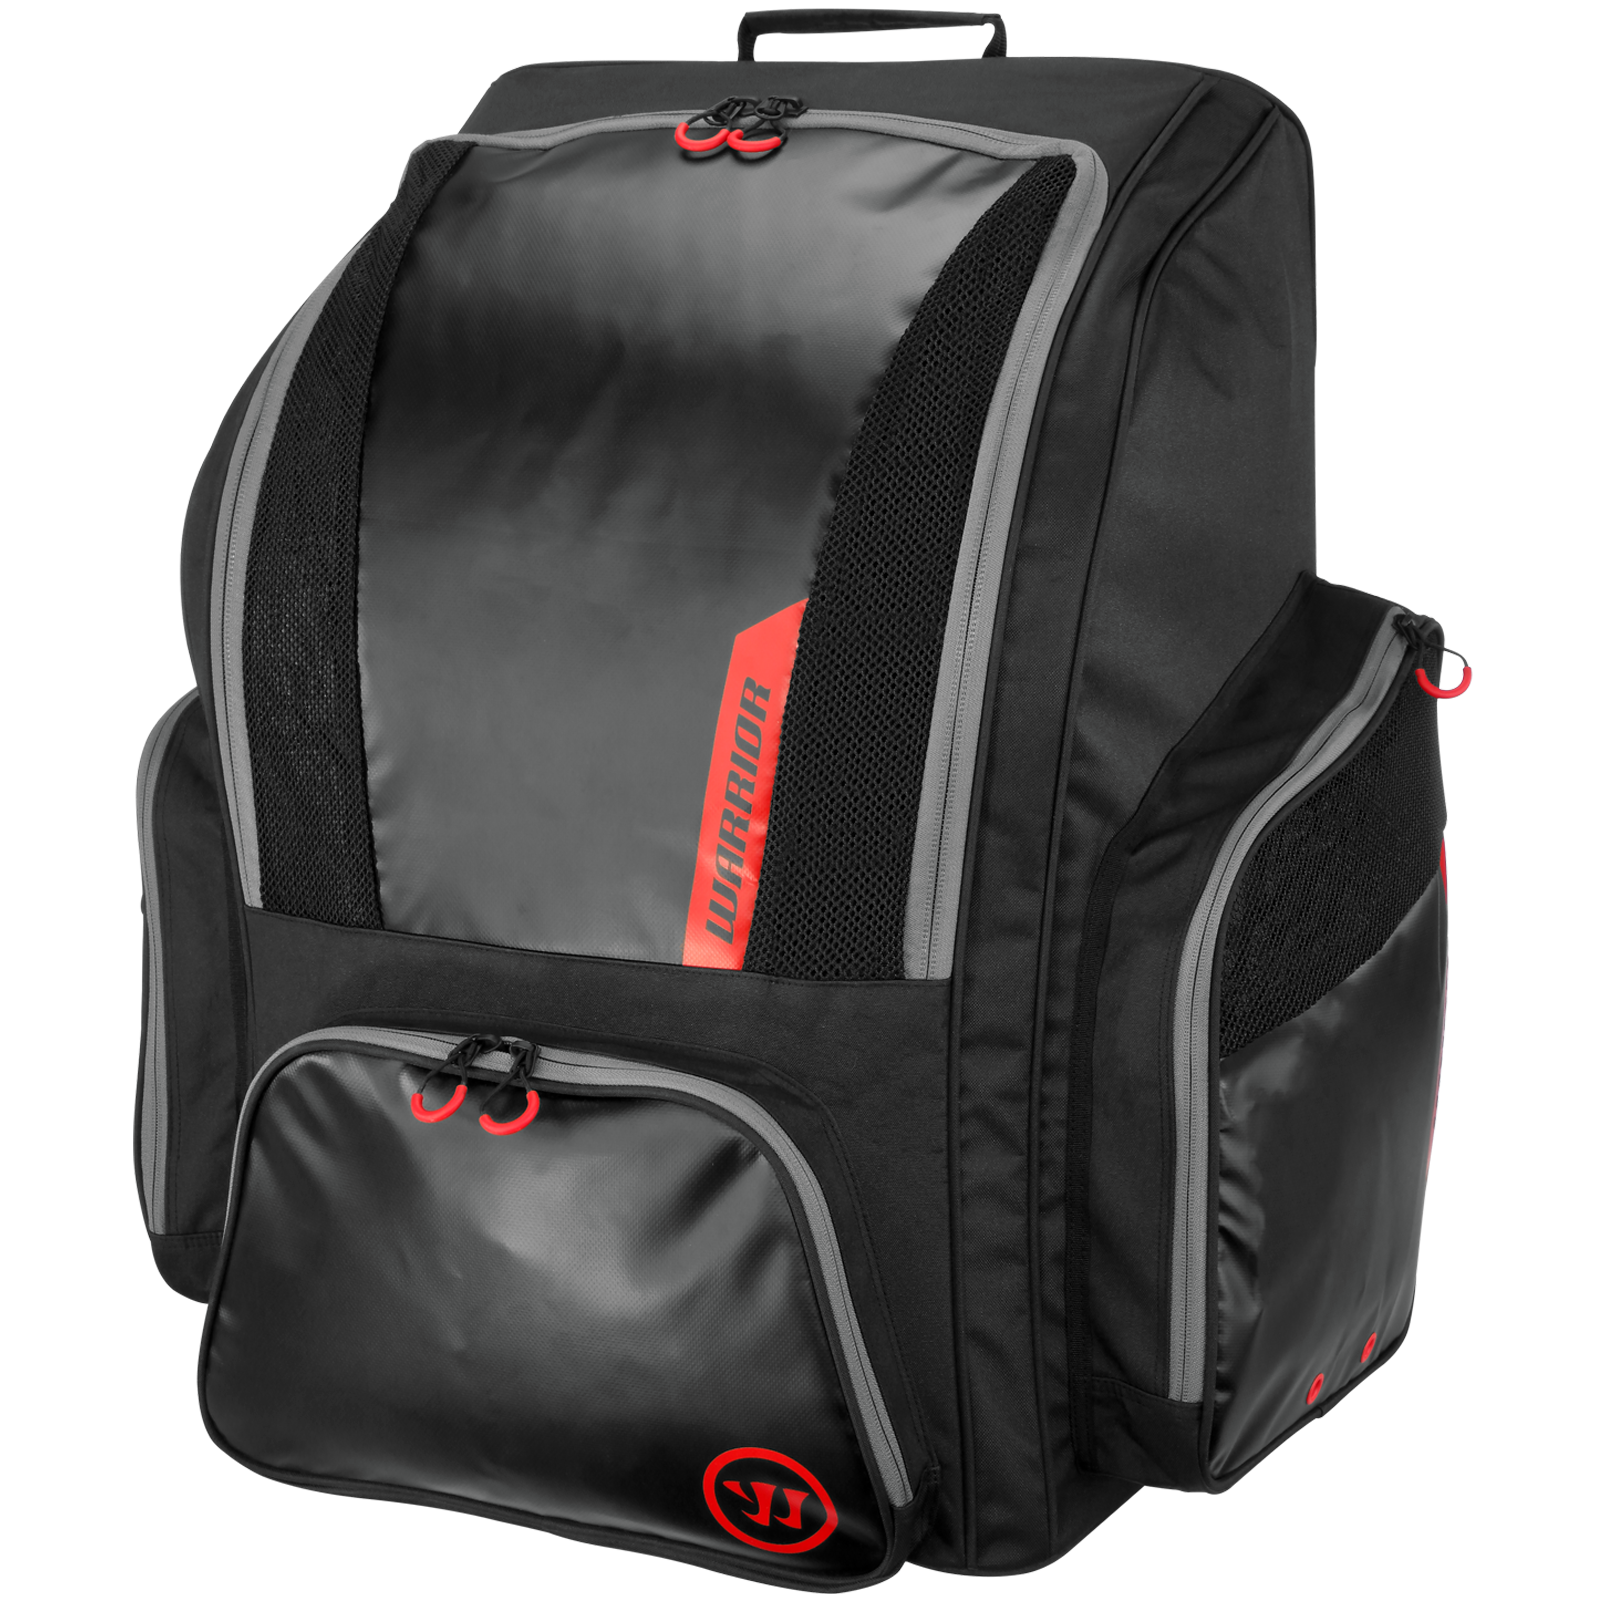 Warrior Pro Carry Backpack